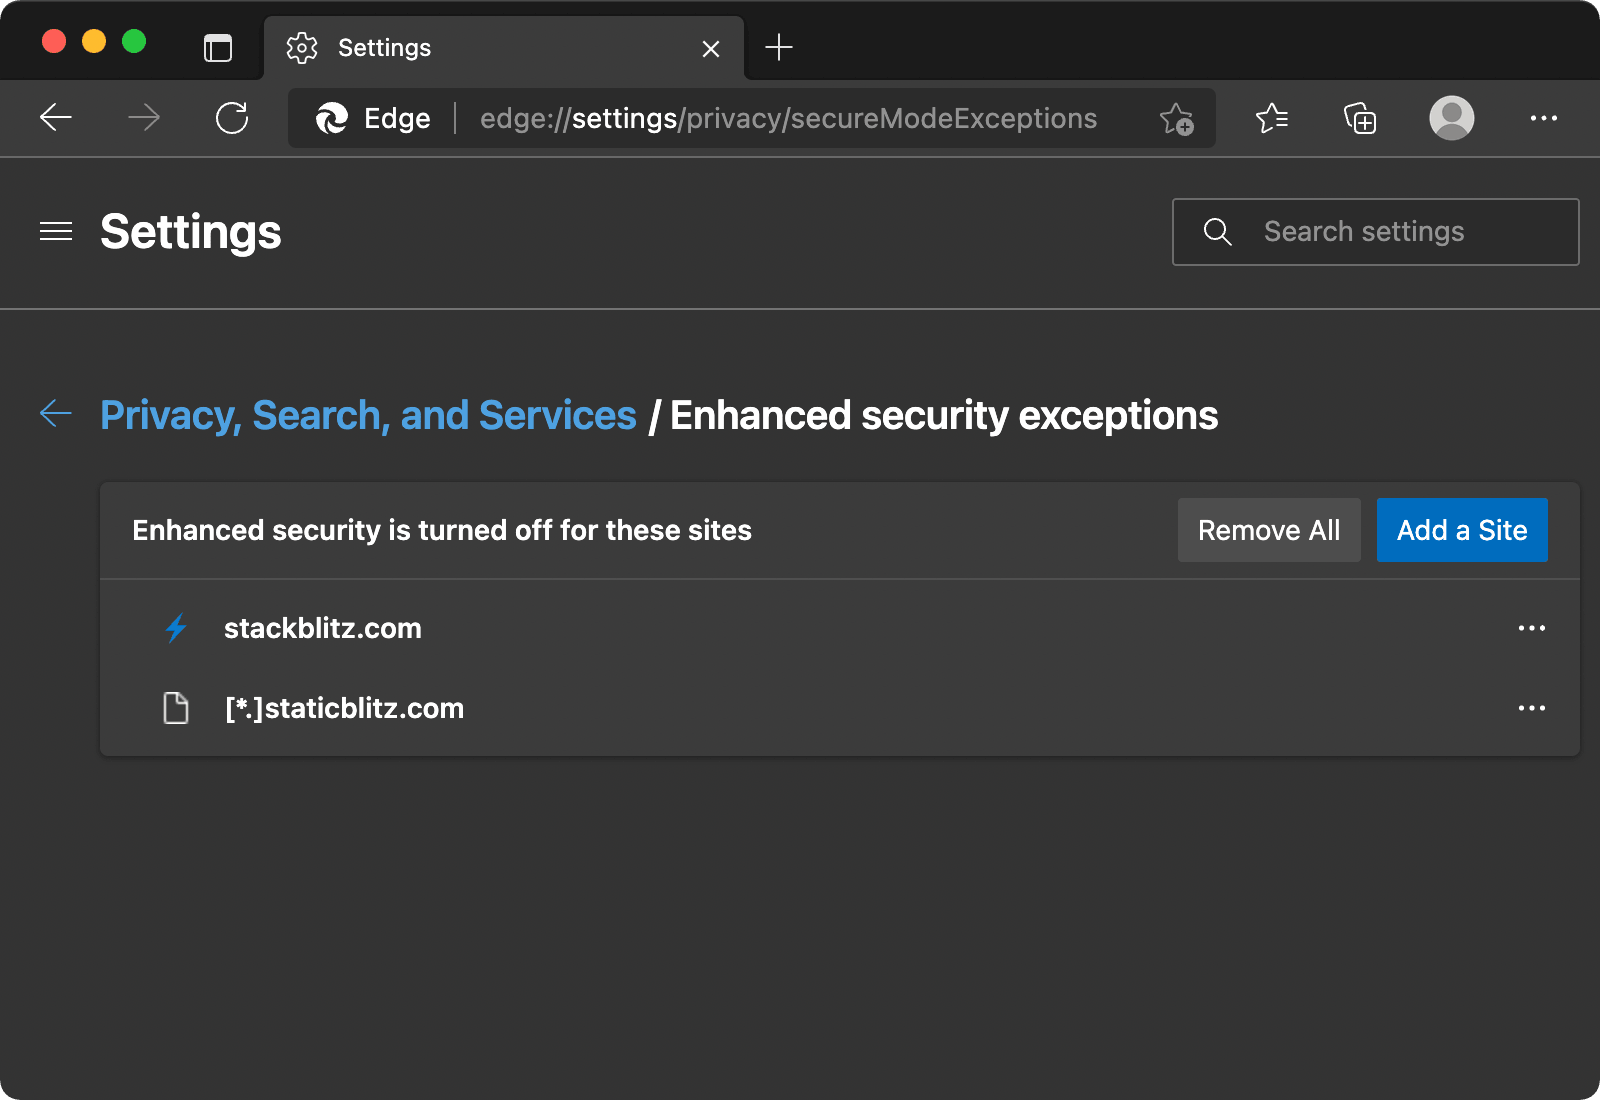 Edge privacy settings showing two entries added under the label “Enhanced security is turned off for these sites”.